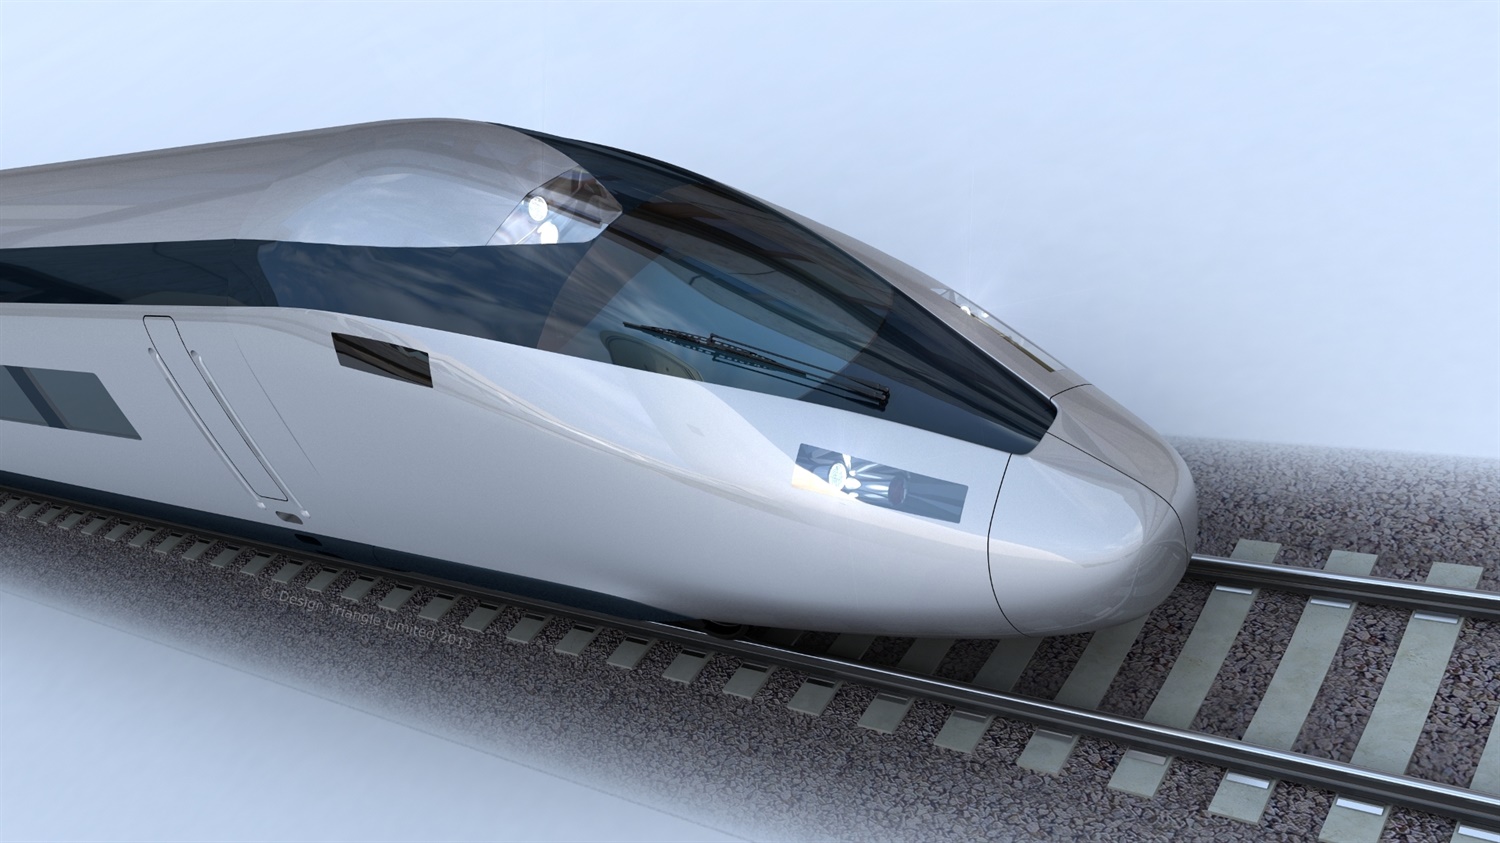 HS2 admits to ‘serious error’ in £1.76m redundancy payments overspend